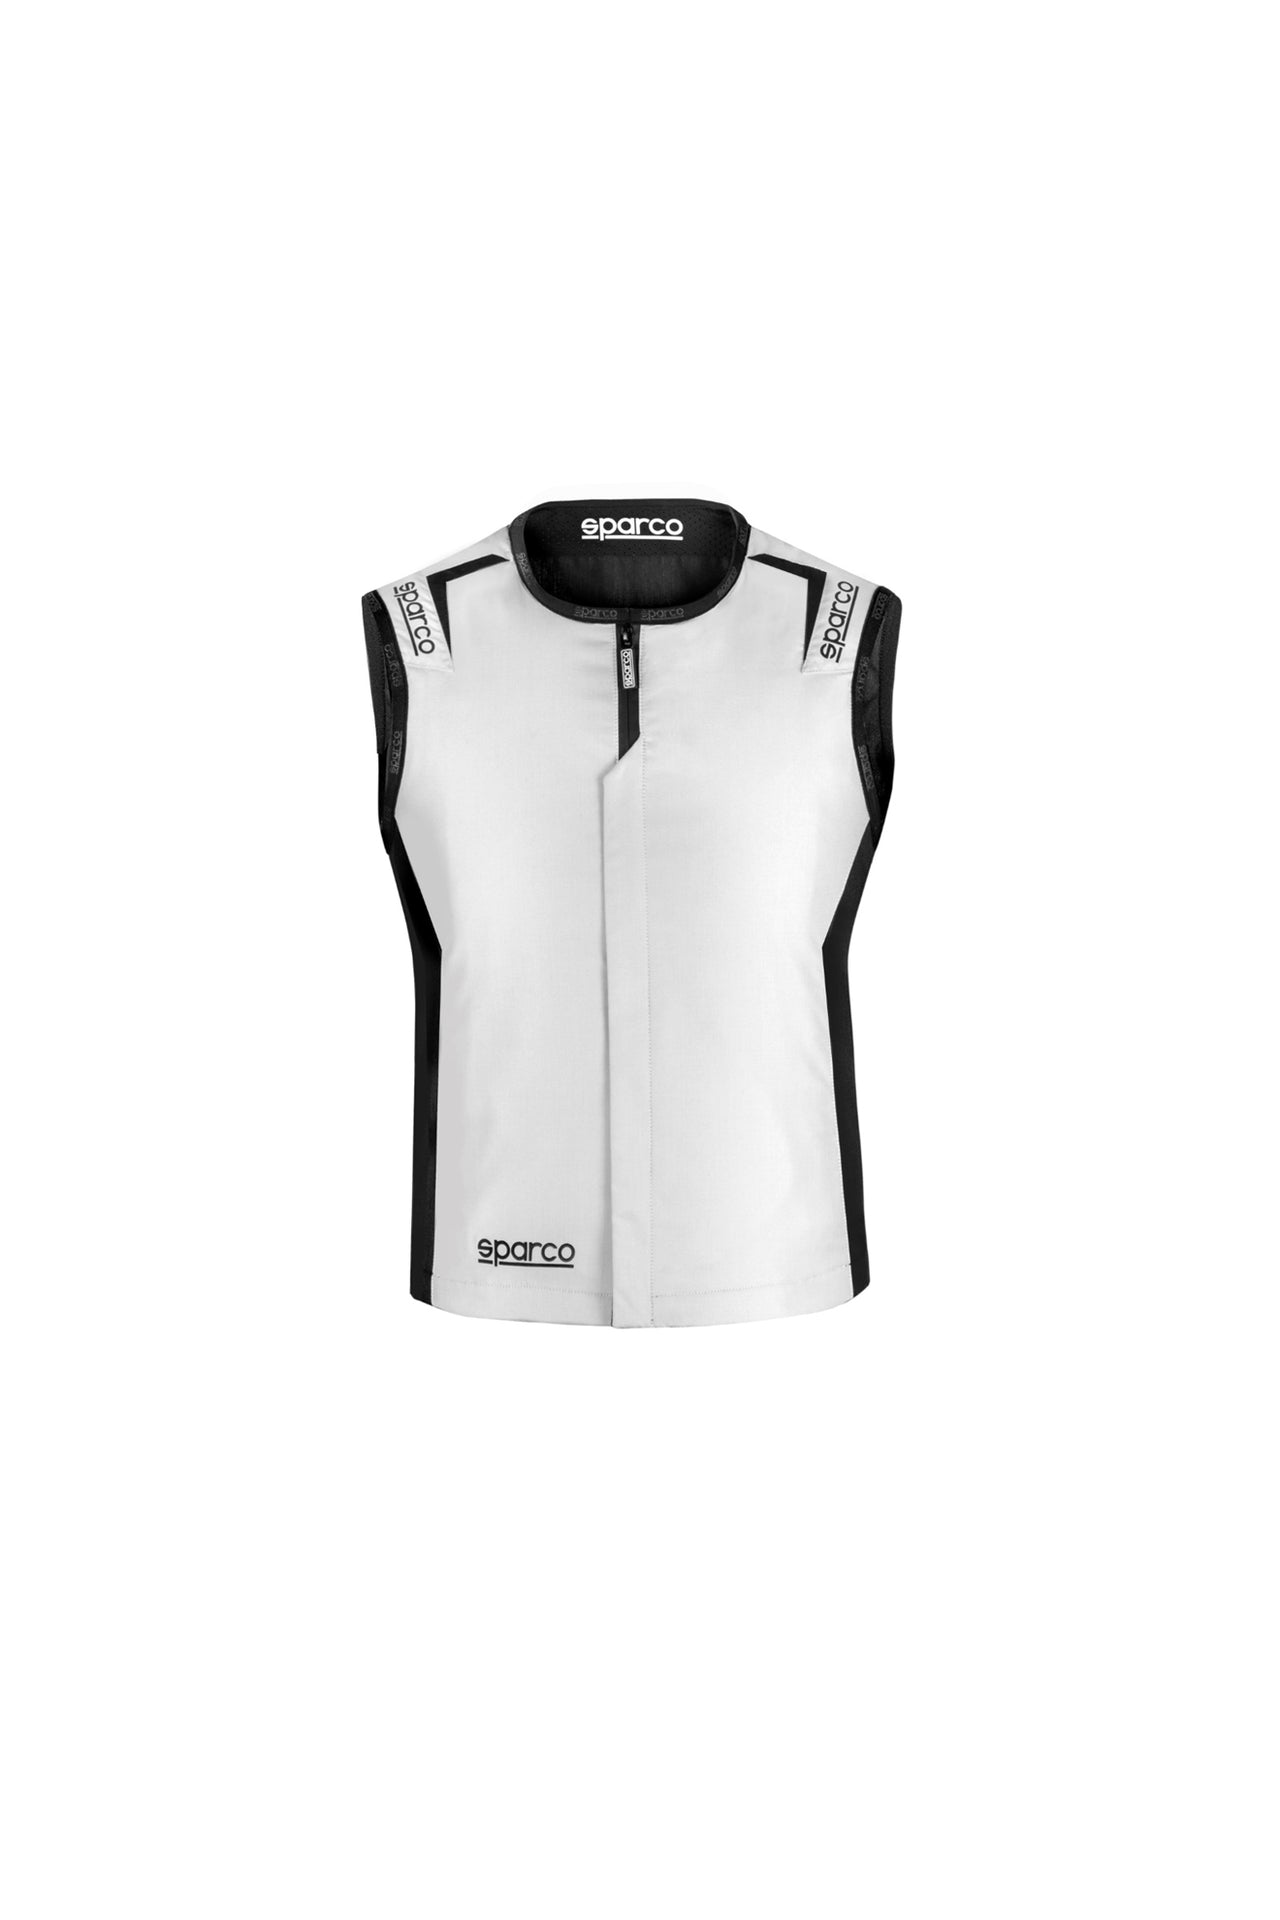 Sparco Ice Vest Driver Cooling from F1 Front